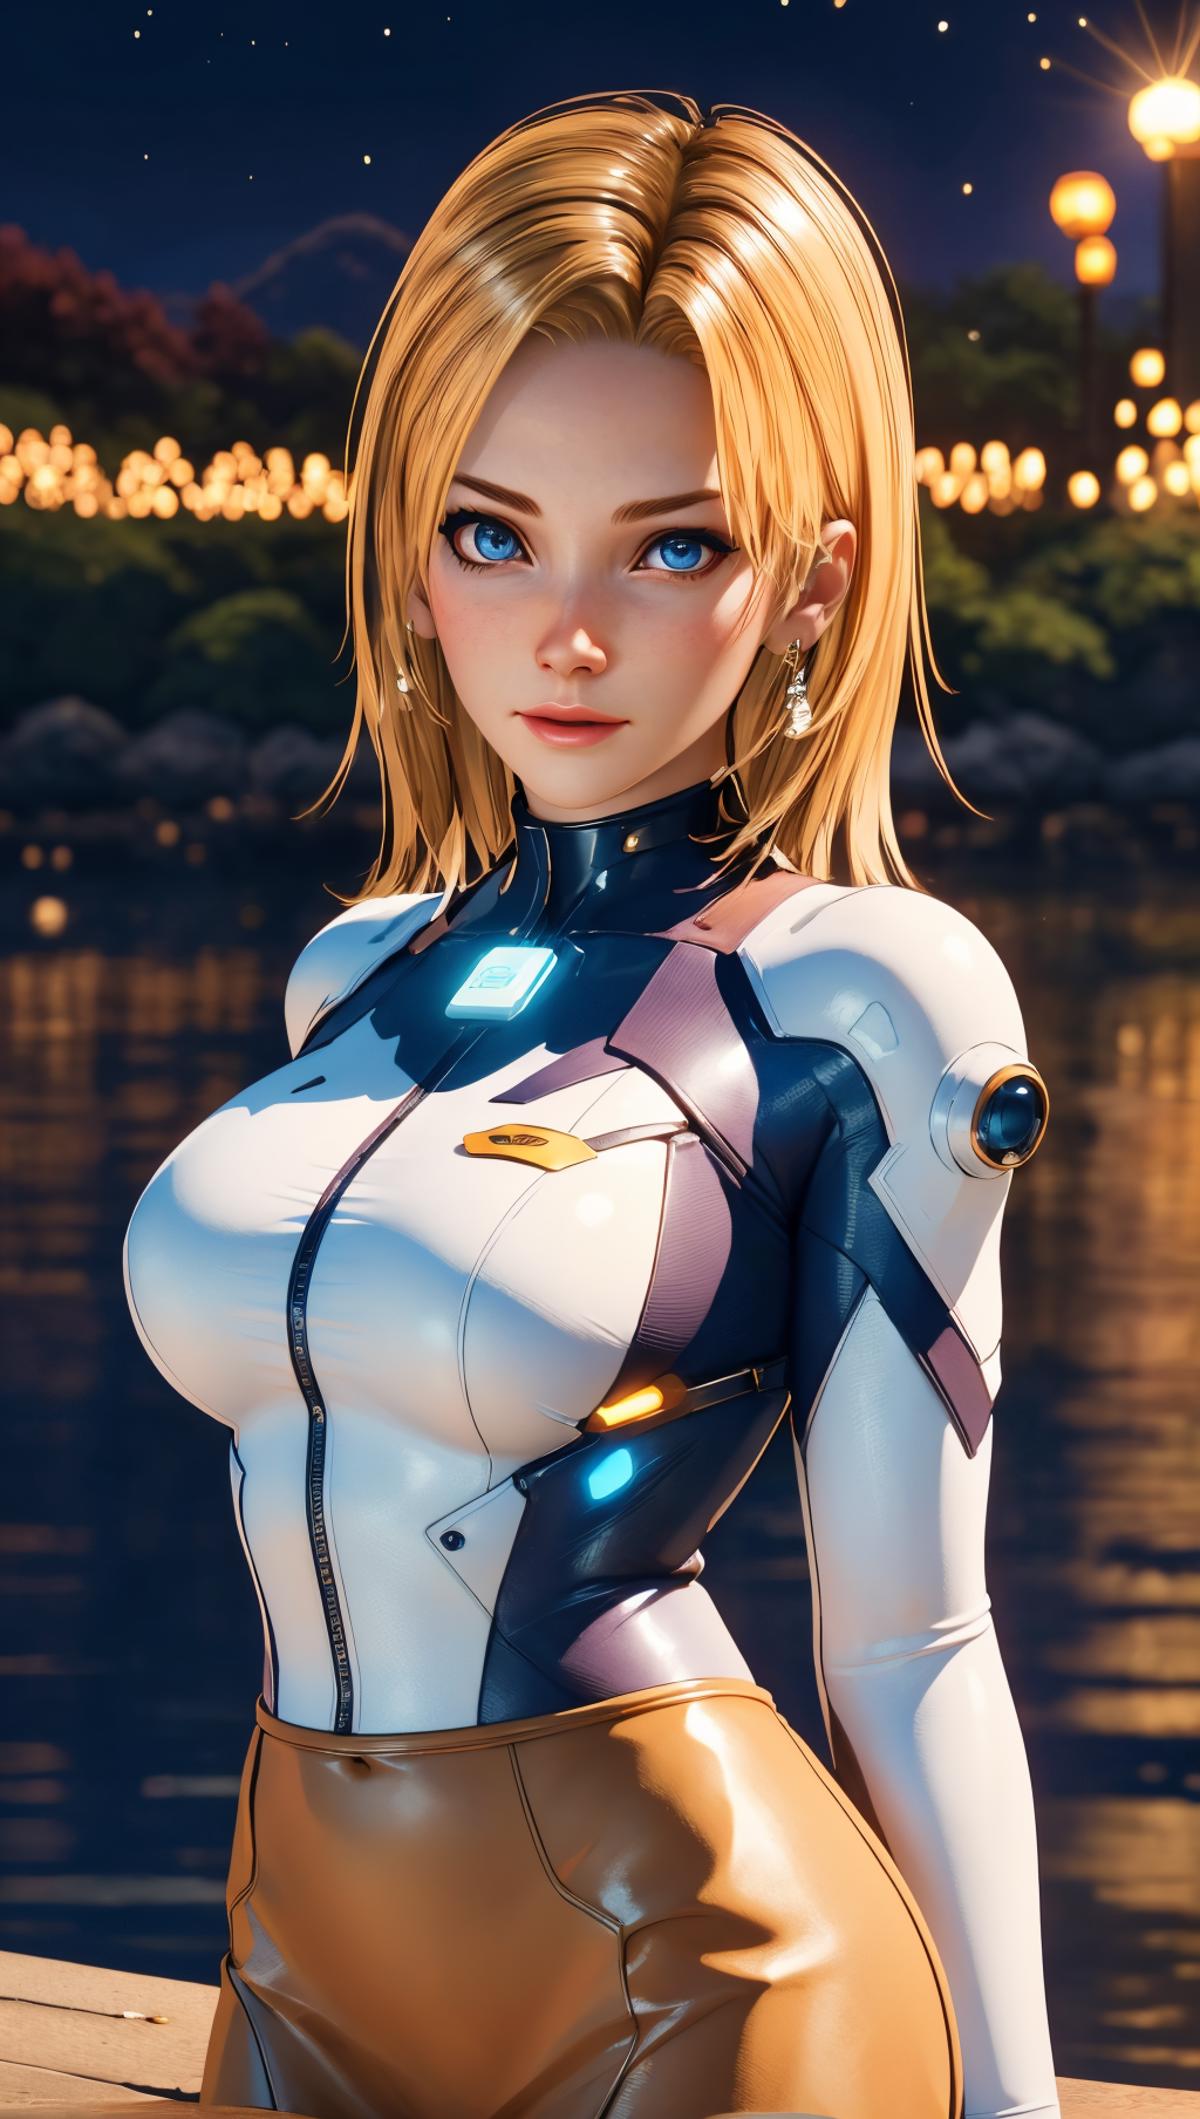 AI model image by Y2Journey